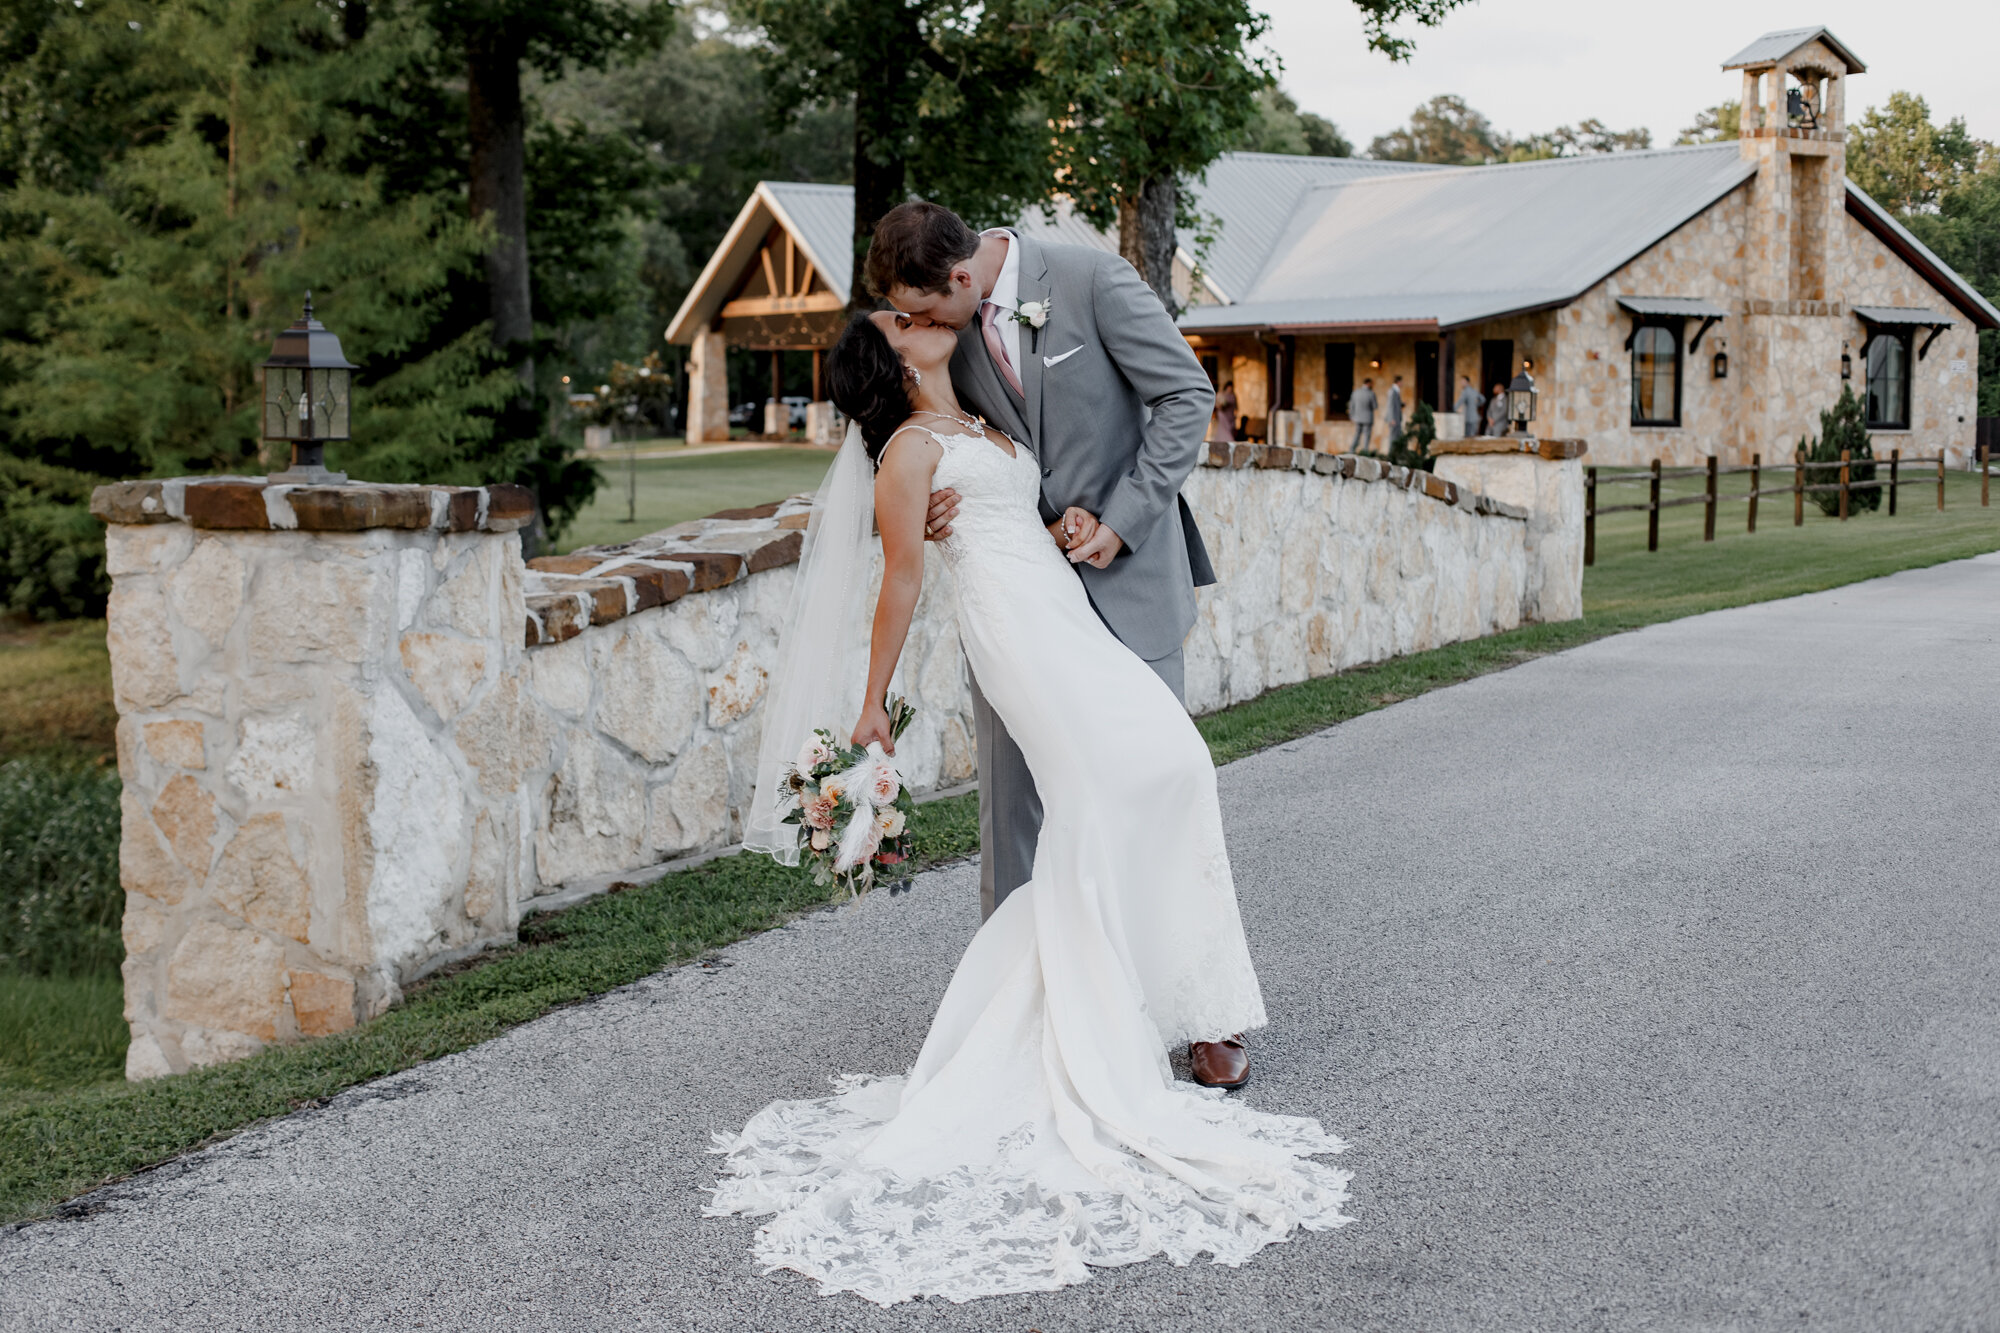 Bride and groom kissing on the bridge. Romantic Chic Country Wedding at Rustic Luxury Balmorhea Events&nbsp;Venue in Magnolia, TX